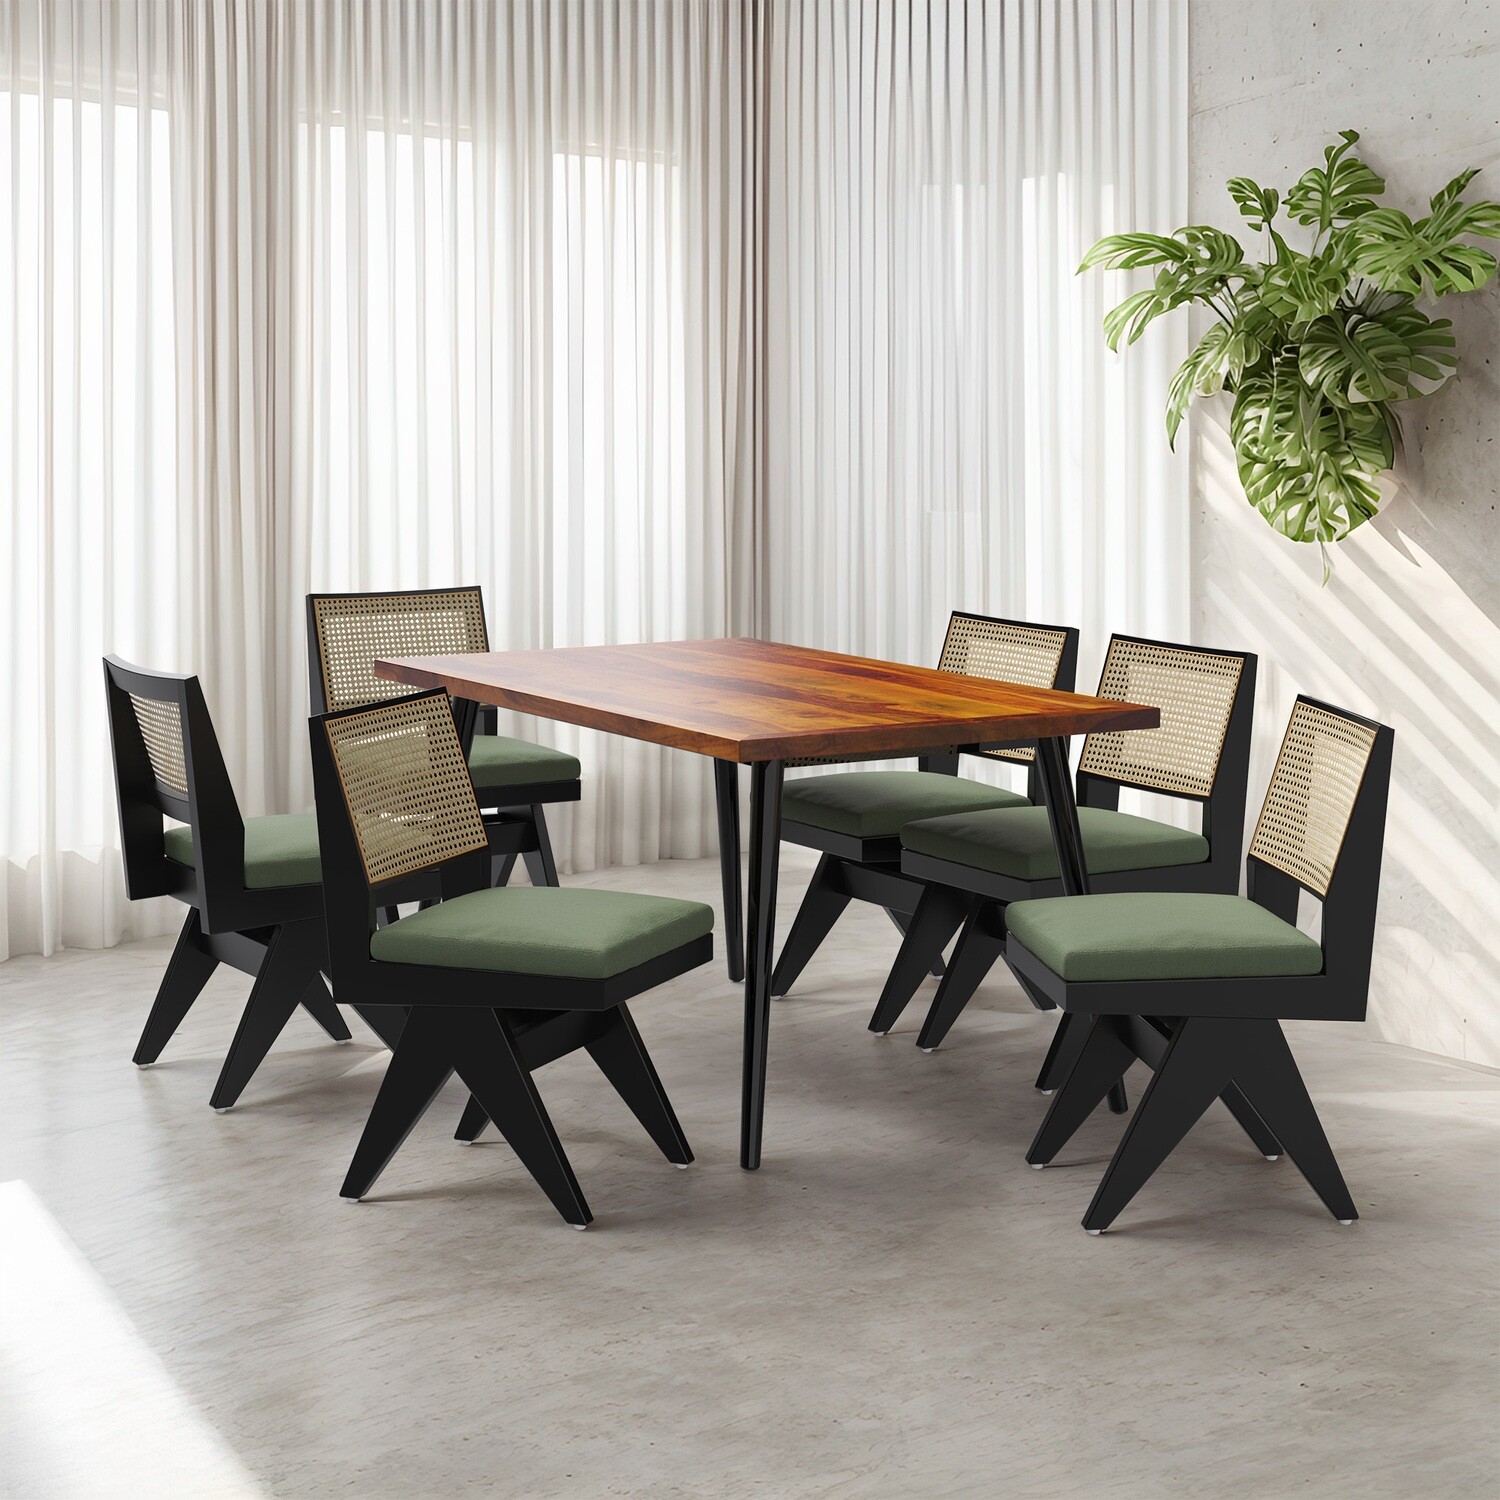 Shelly Plaintop-Jean Dining Table Set - 4 & 6 Seater/ All sizes